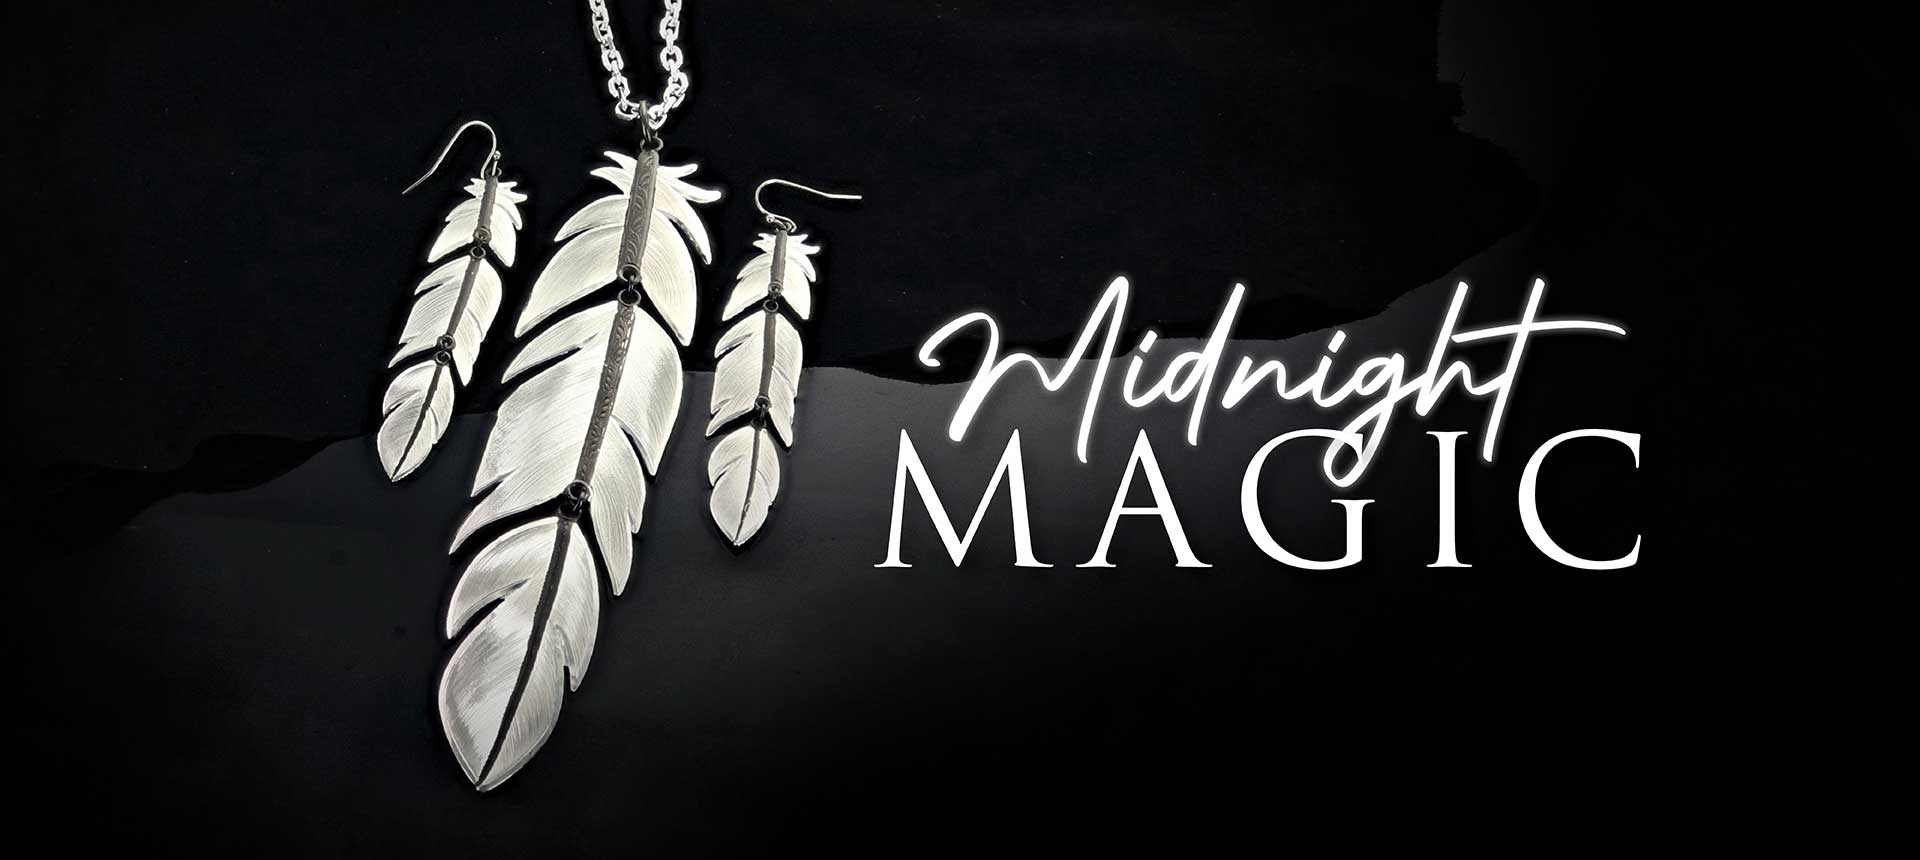 Midnight Magic Feather Jewelry | Women's Signature Jewelry Collection | Montana Silversmiths